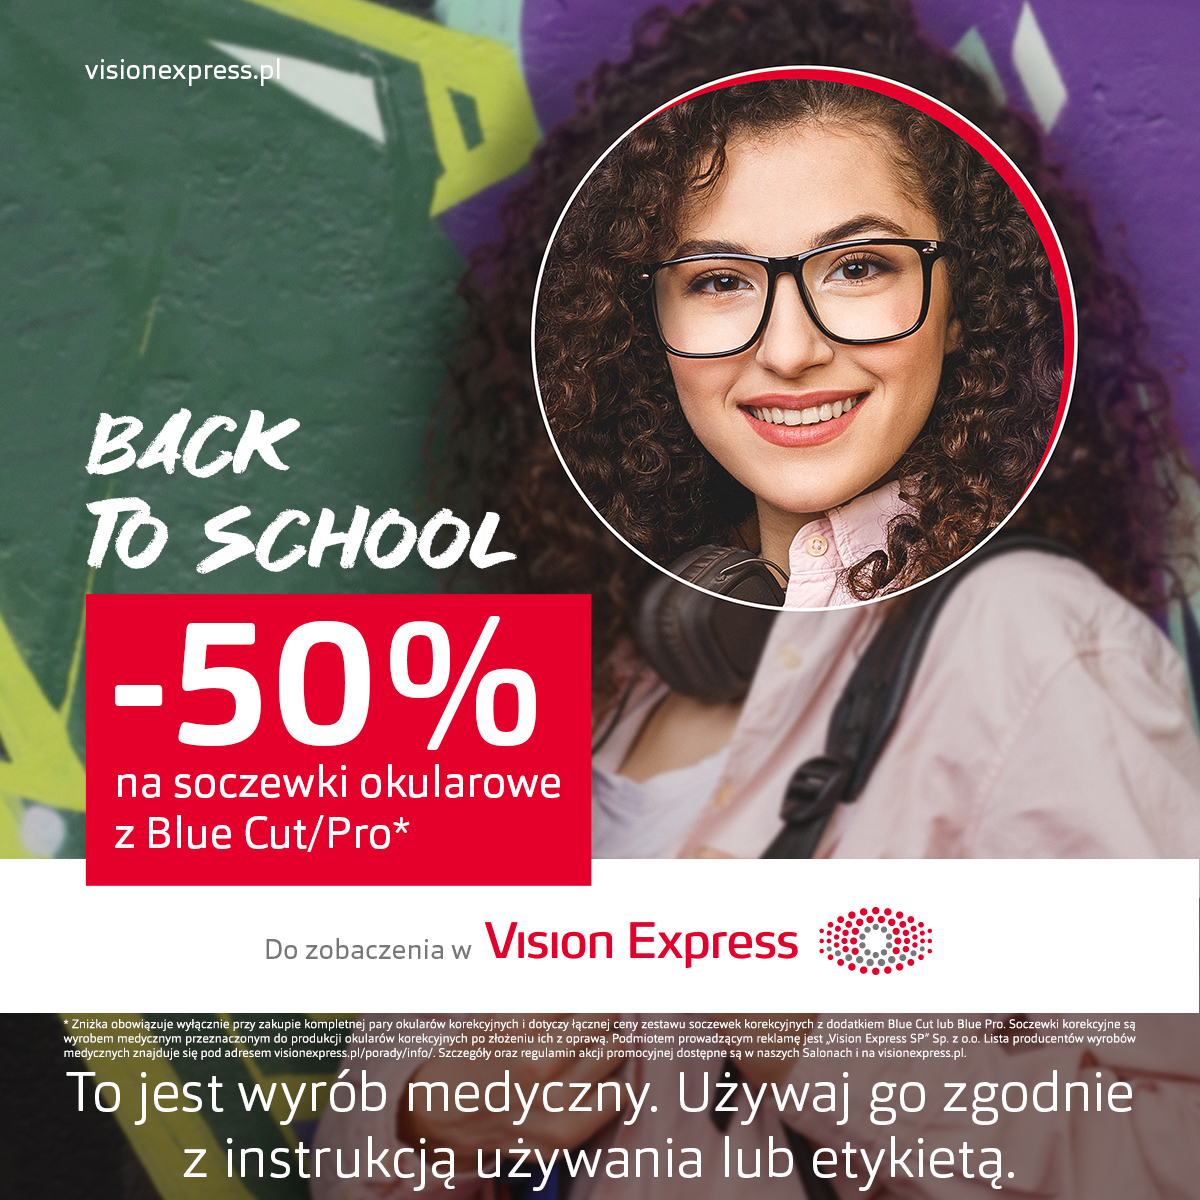 VISION EXPRESS: back to school